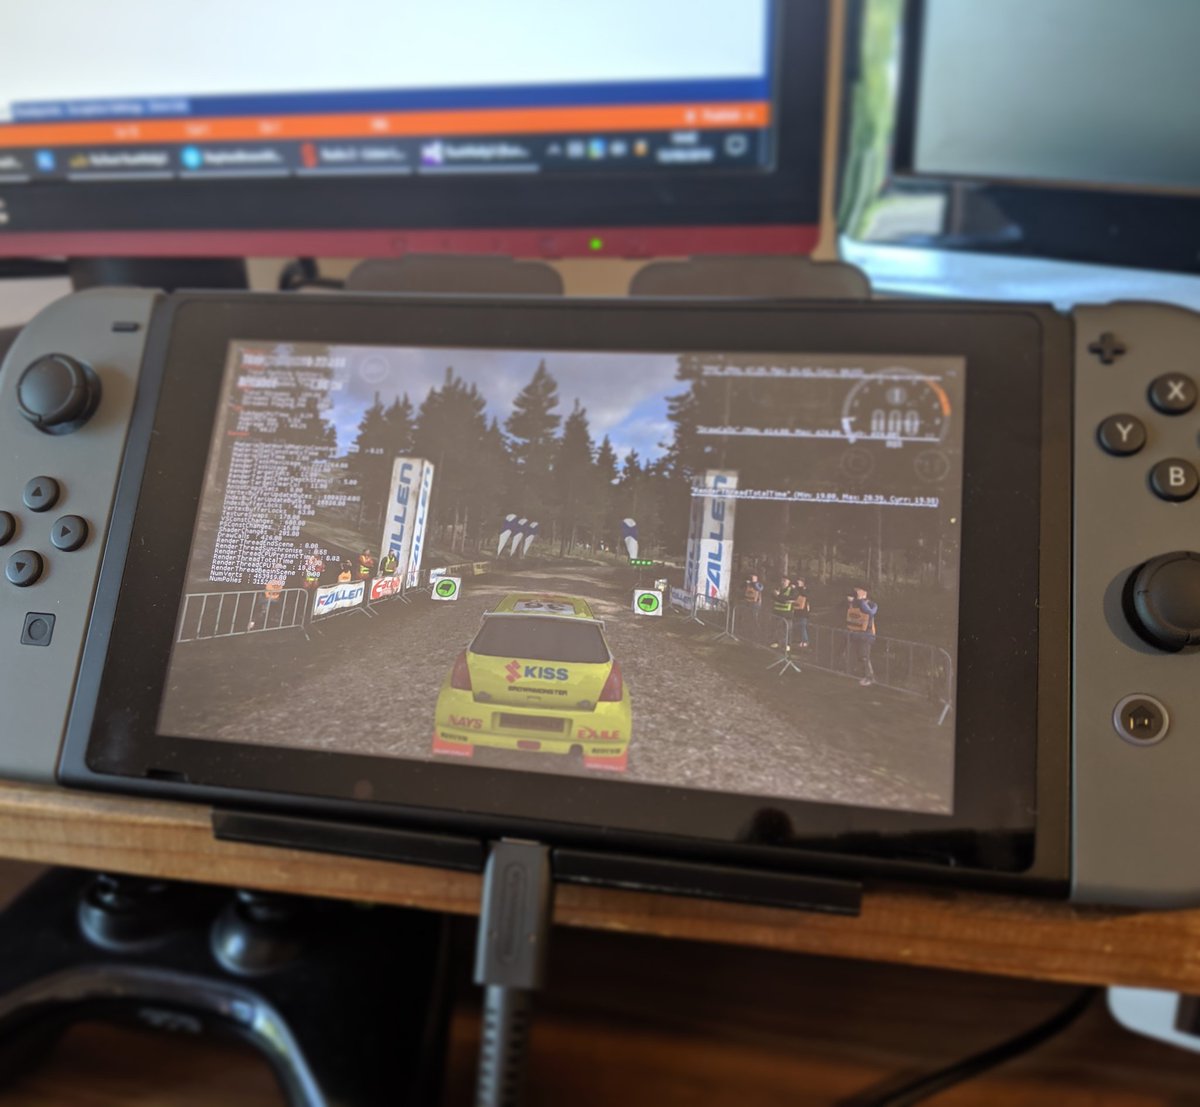 A week later (2 days and 3 nights work) and it is take off with the #NintendoSwitch build! #gamedev #nintendo #switch #indiedev #customengine #quickturnaround! #rushrally3 #brownmonster #wrc #rallye #rally